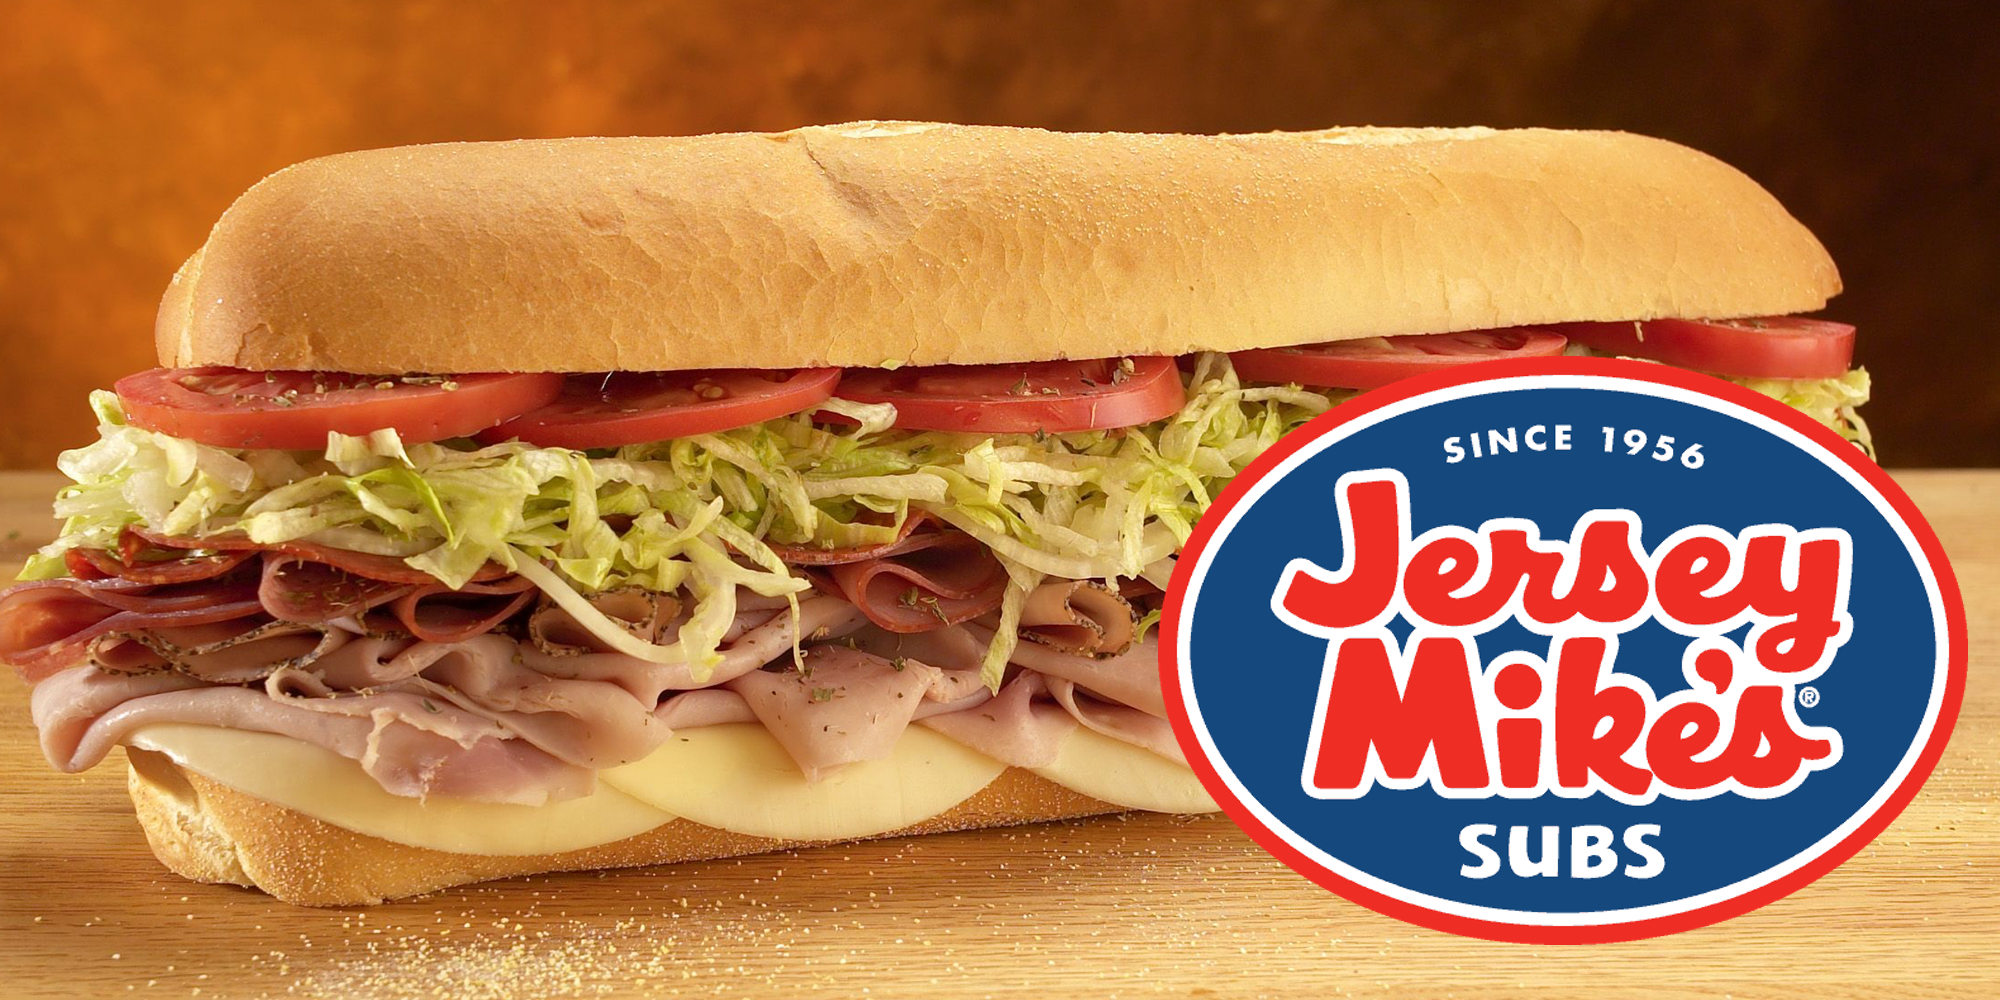 Buy any sub at Jersey Mike's and get one free